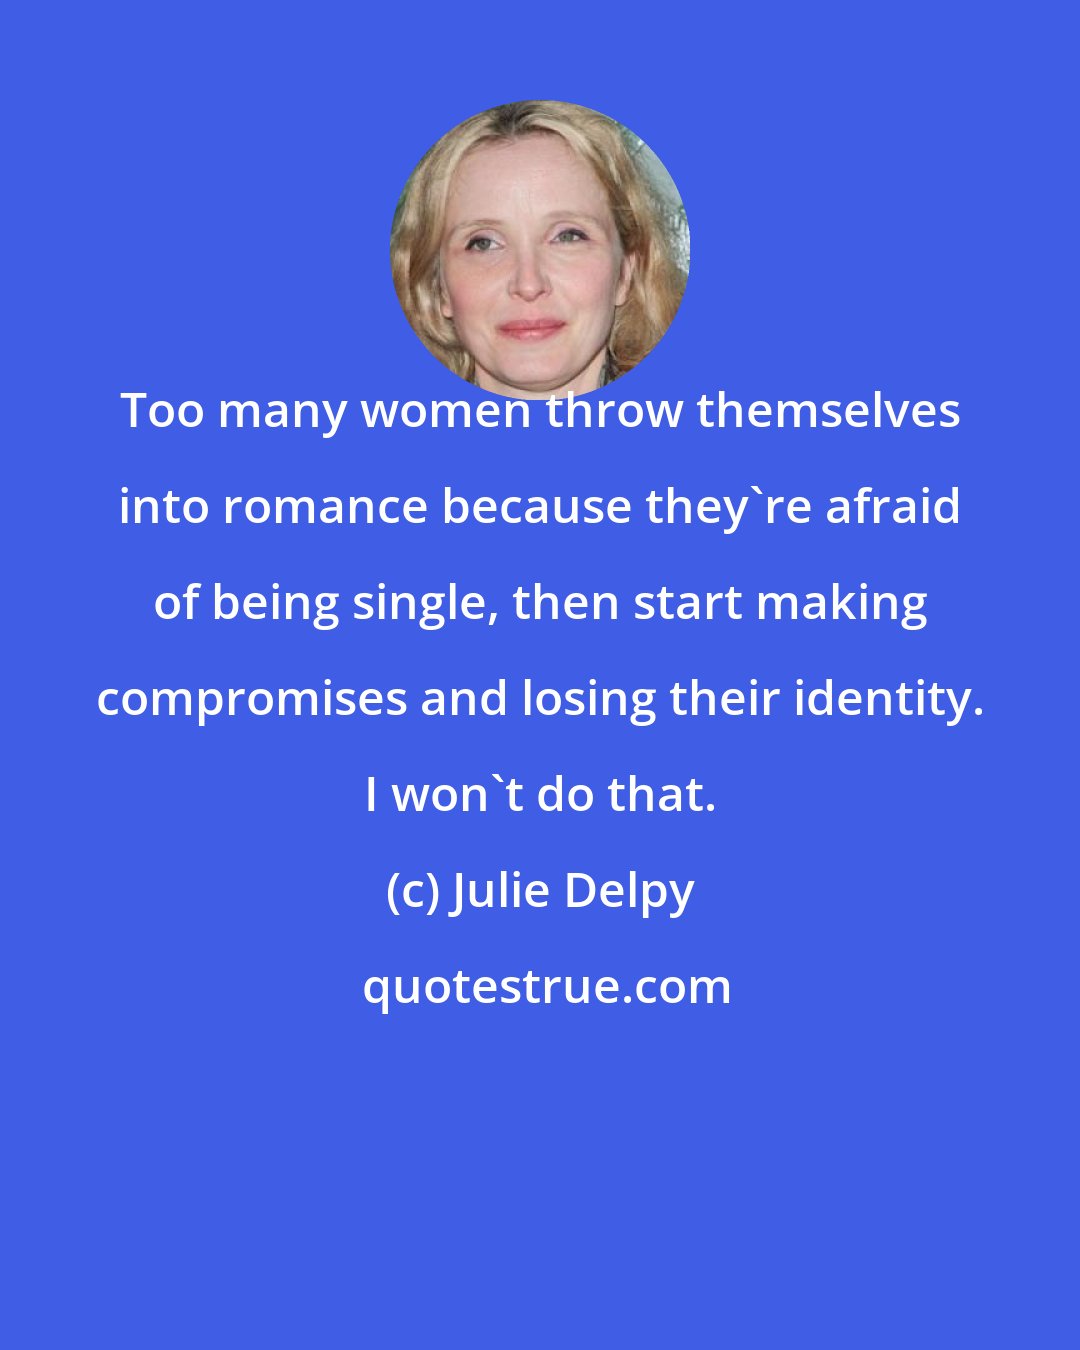 Julie Delpy: Too many women throw themselves into romance because they're afraid of being single, then start making compromises and losing their identity. I won't do that.